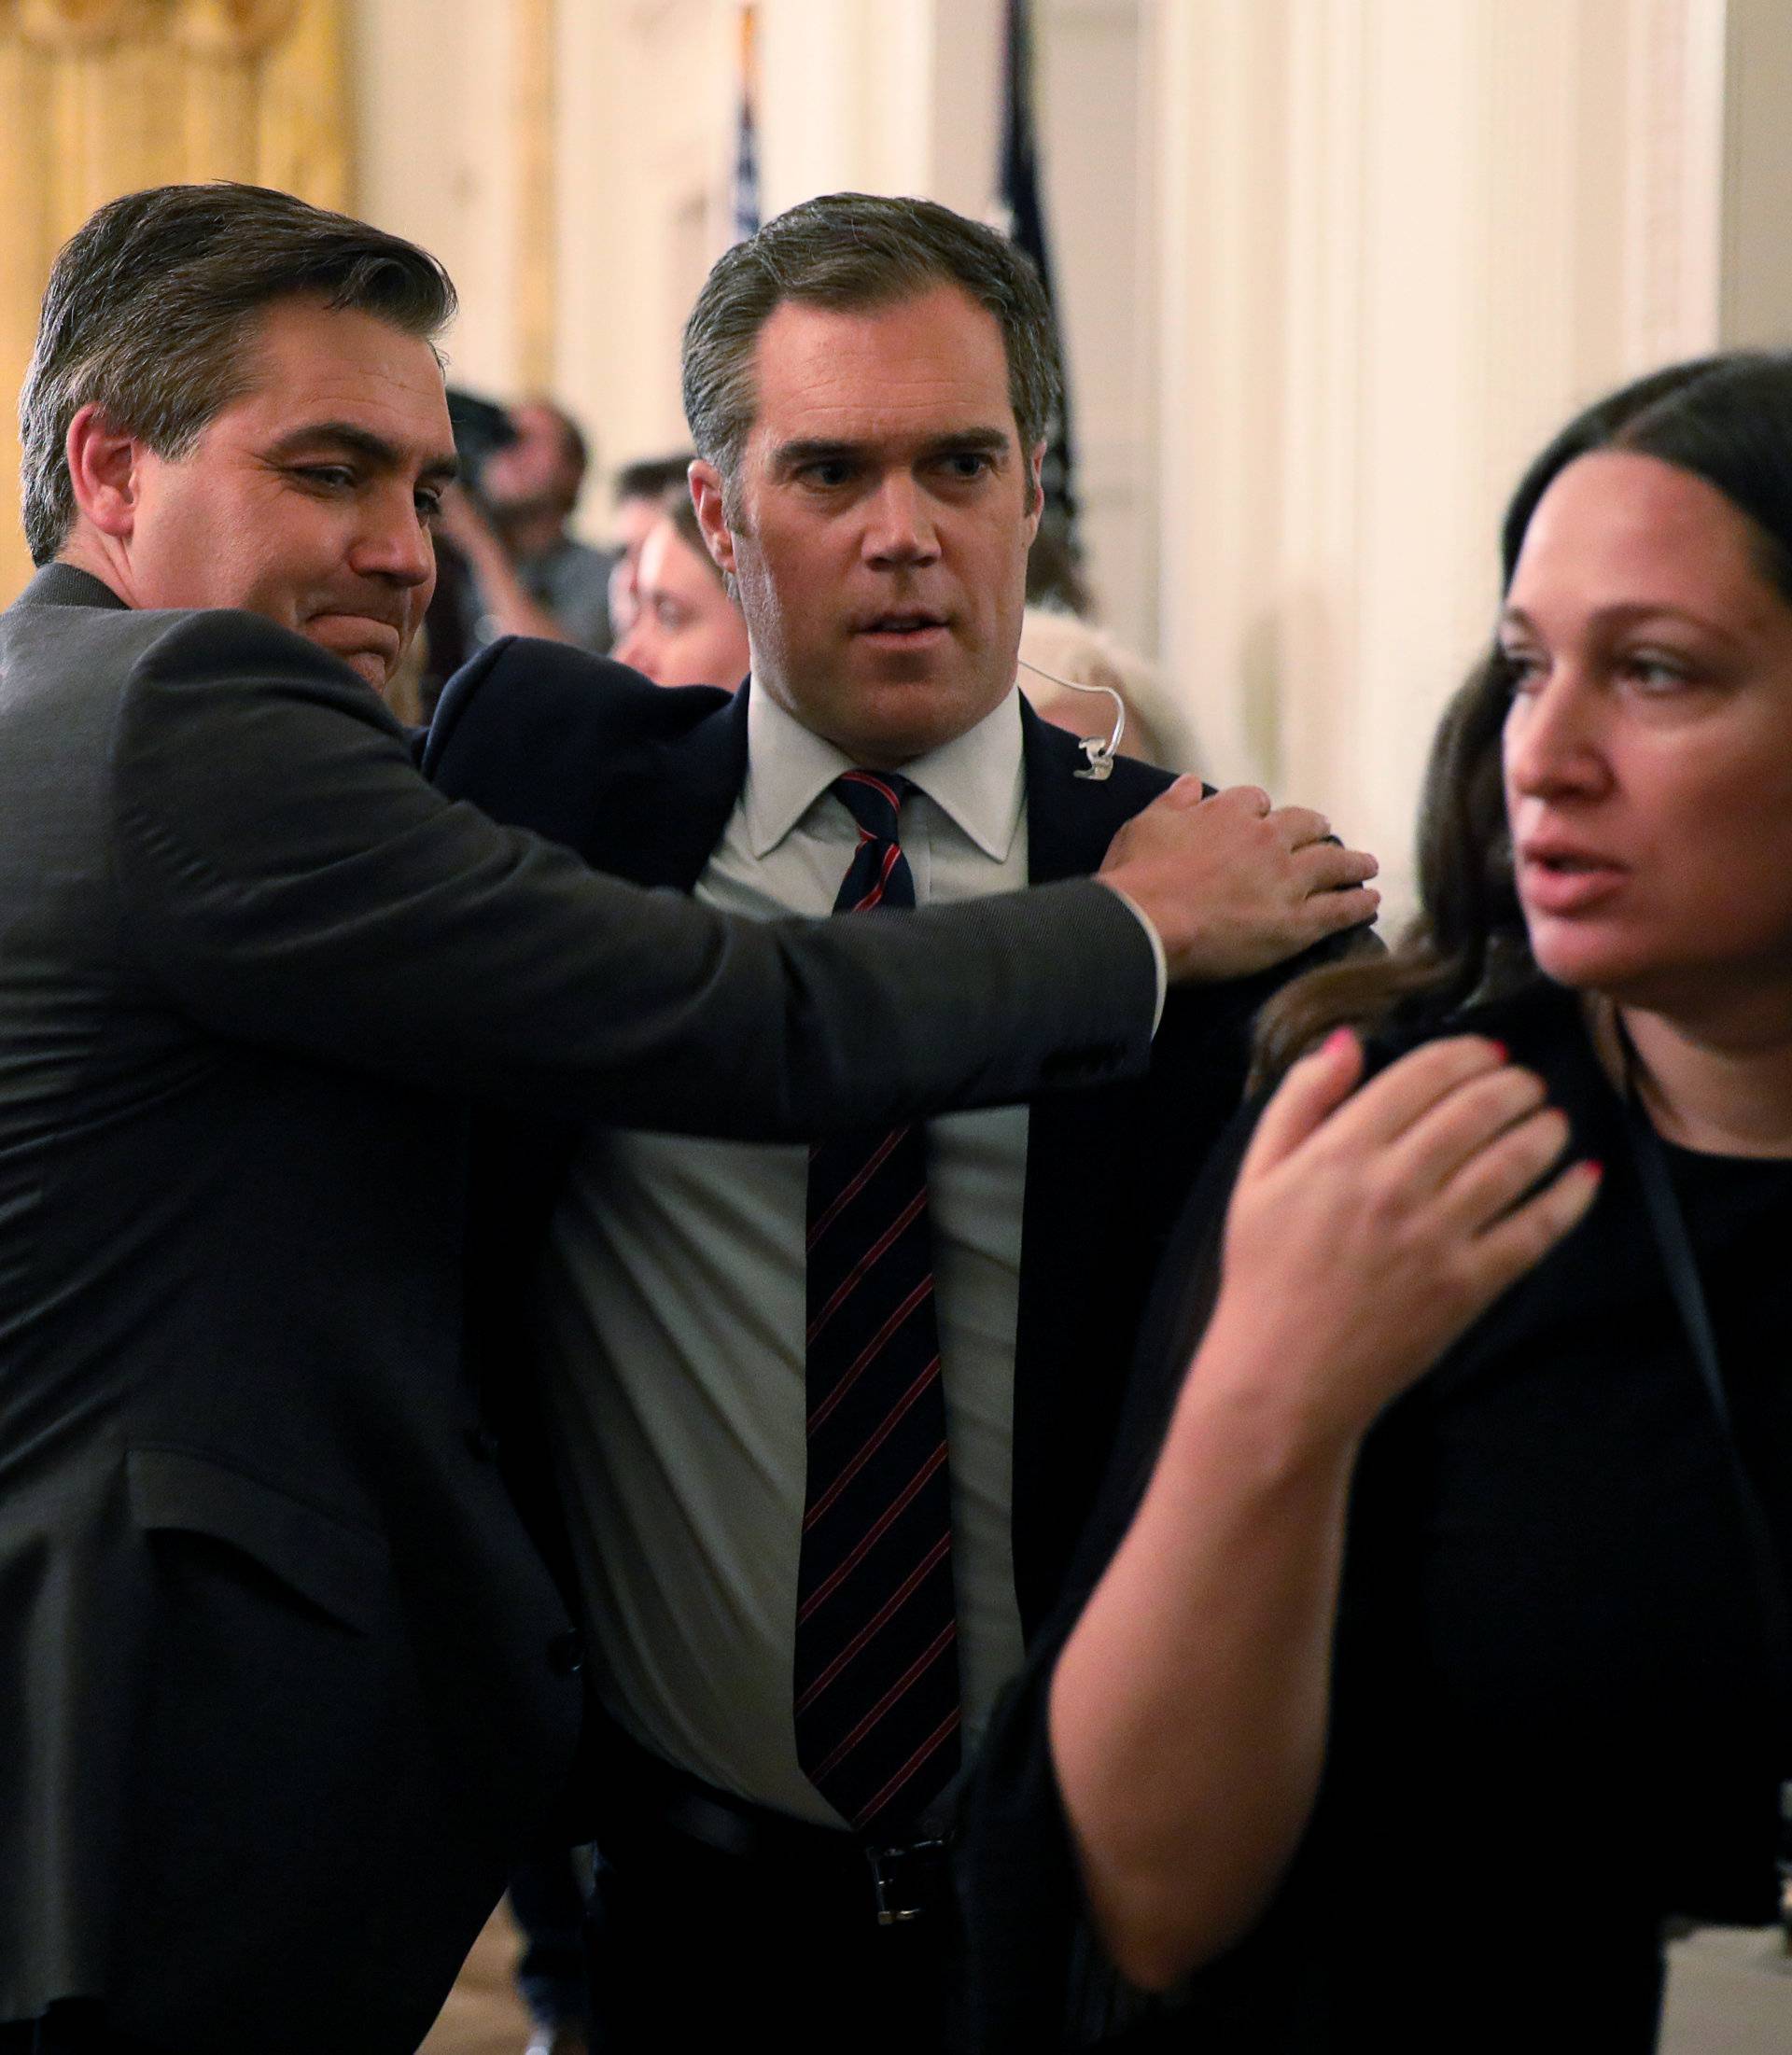 CNN's Acosta hugs colleague Alexander of NBC after tense exchange with U.S. President Trump during news conference at White House in Washington